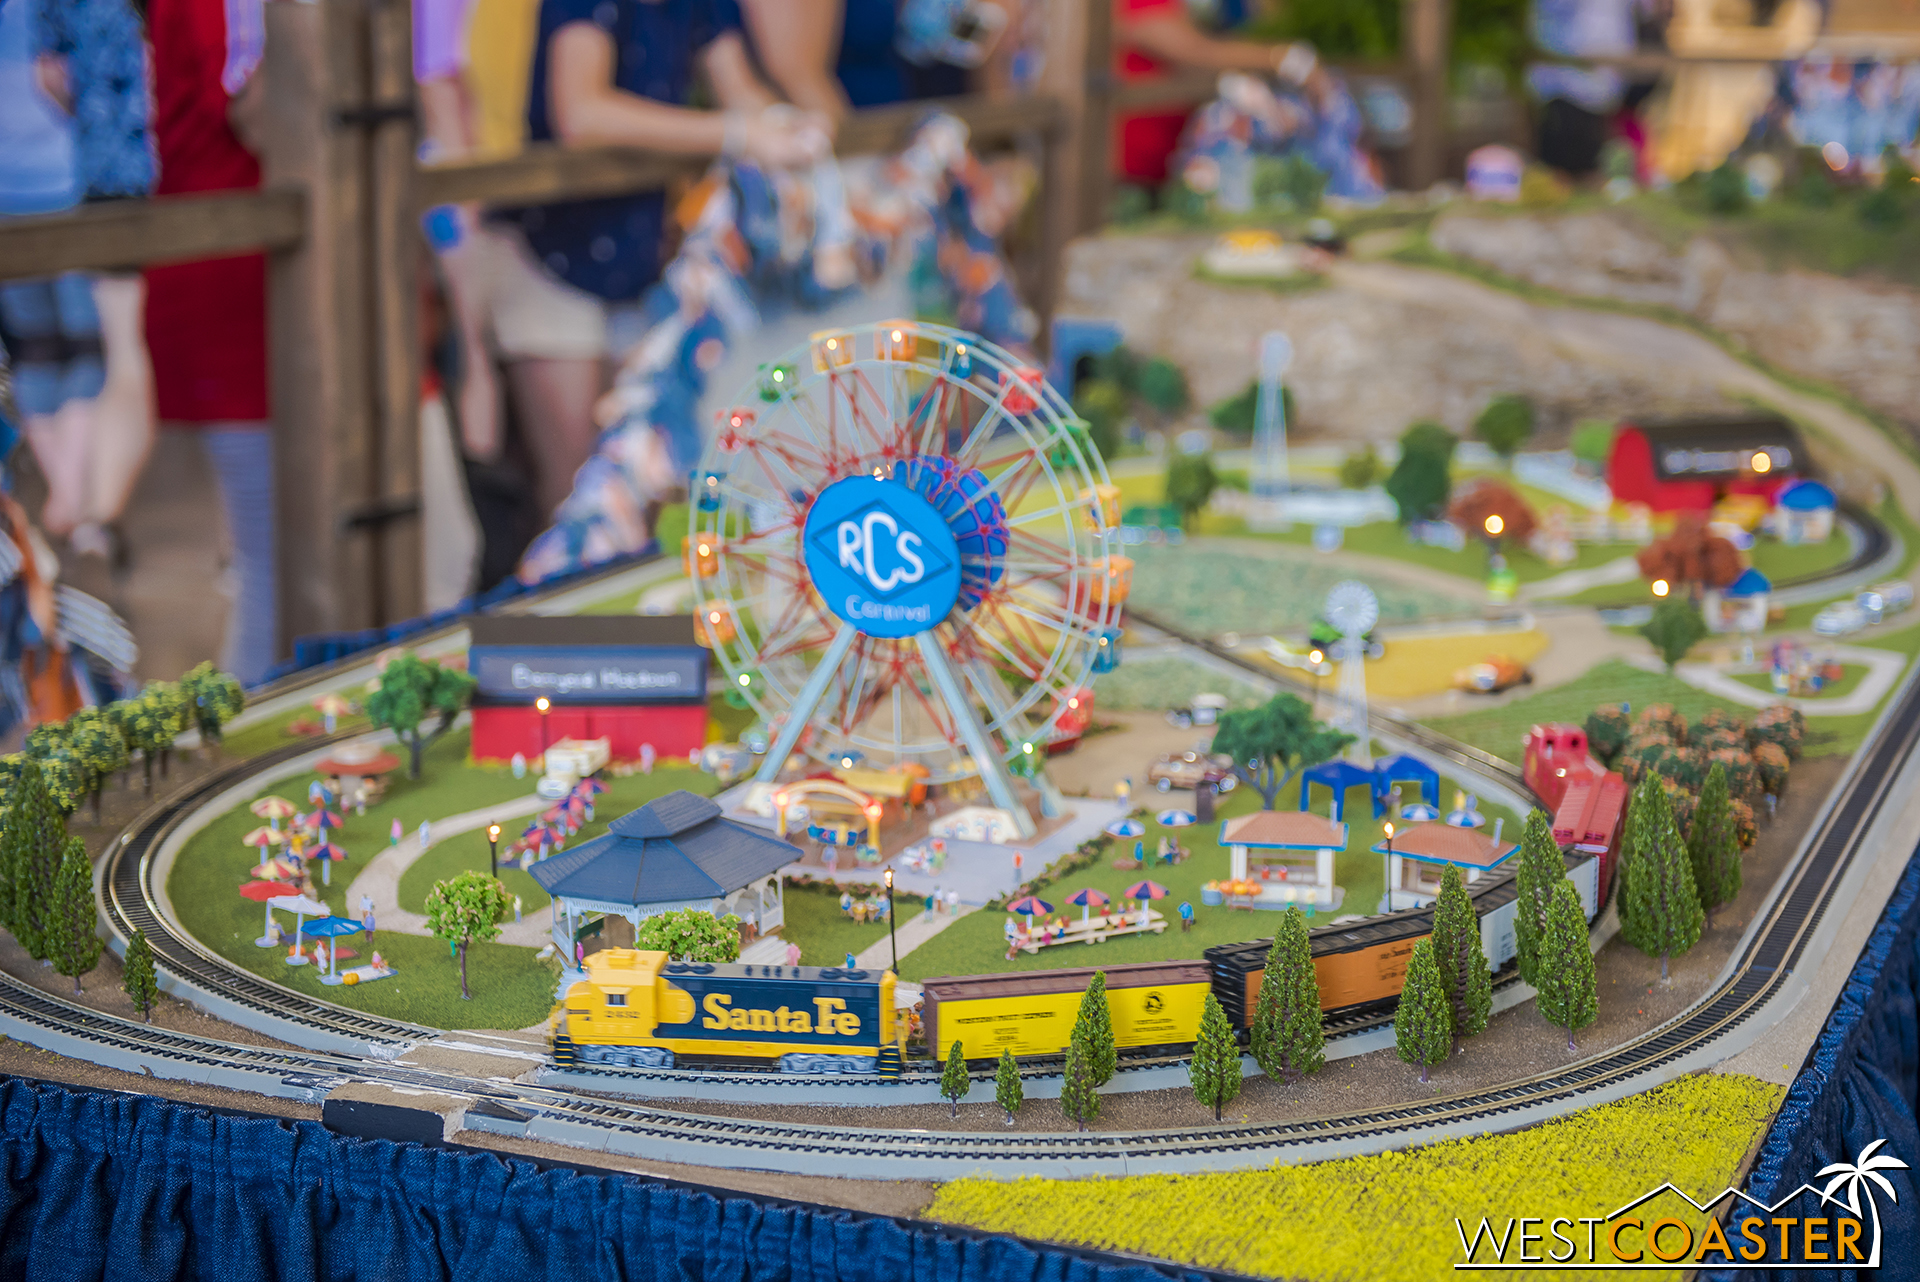  There’s a cool miniature railroad this year too. 